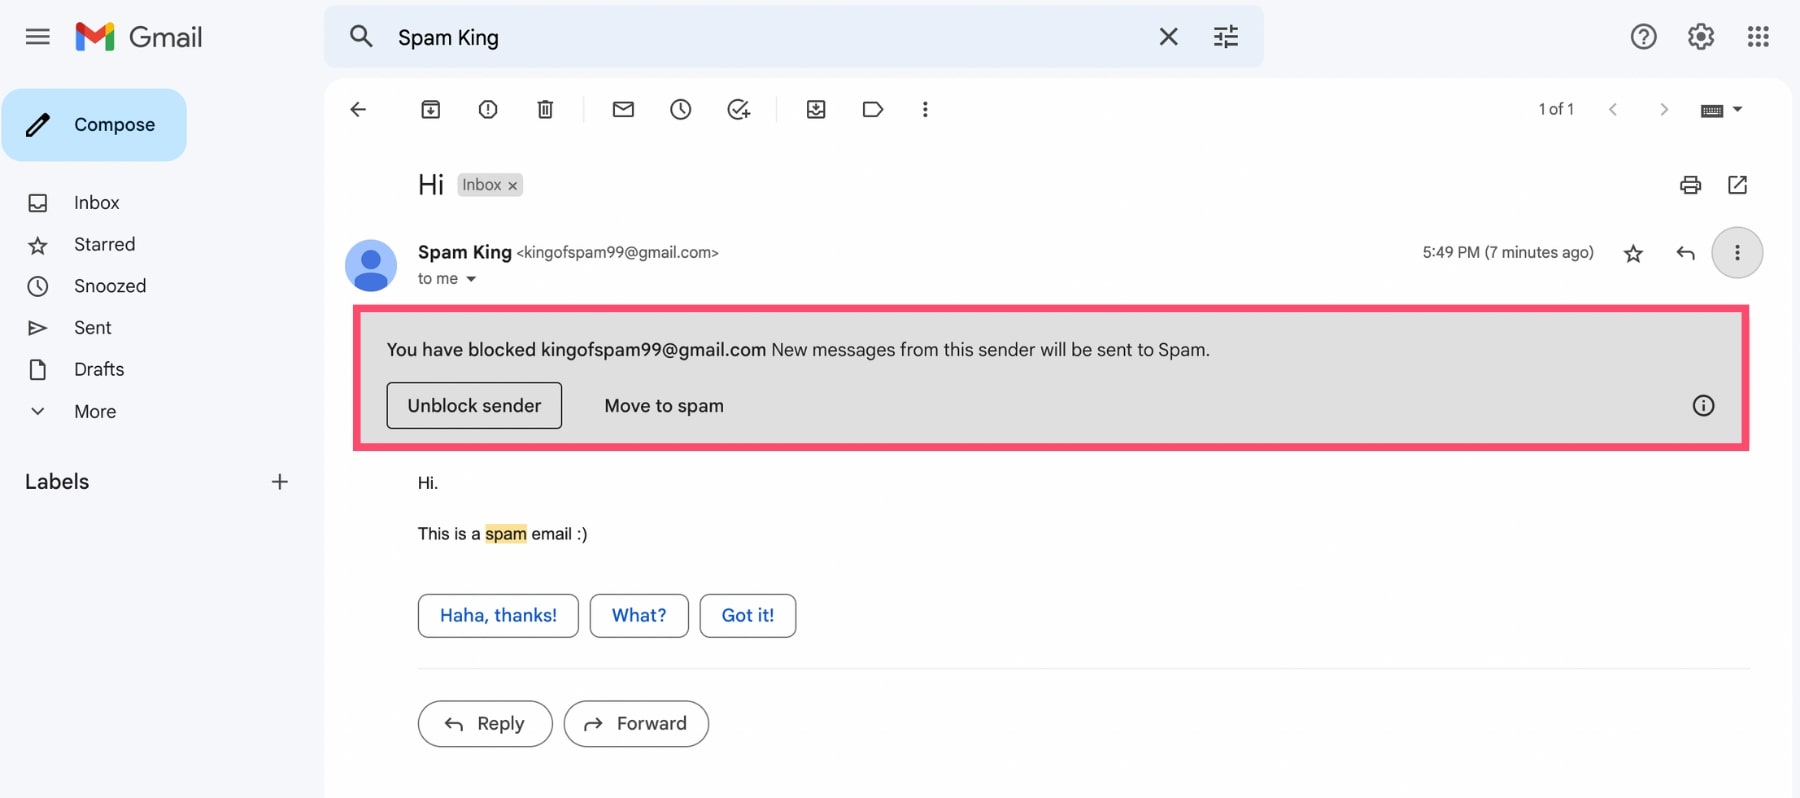 How to unblock someone on Gmail